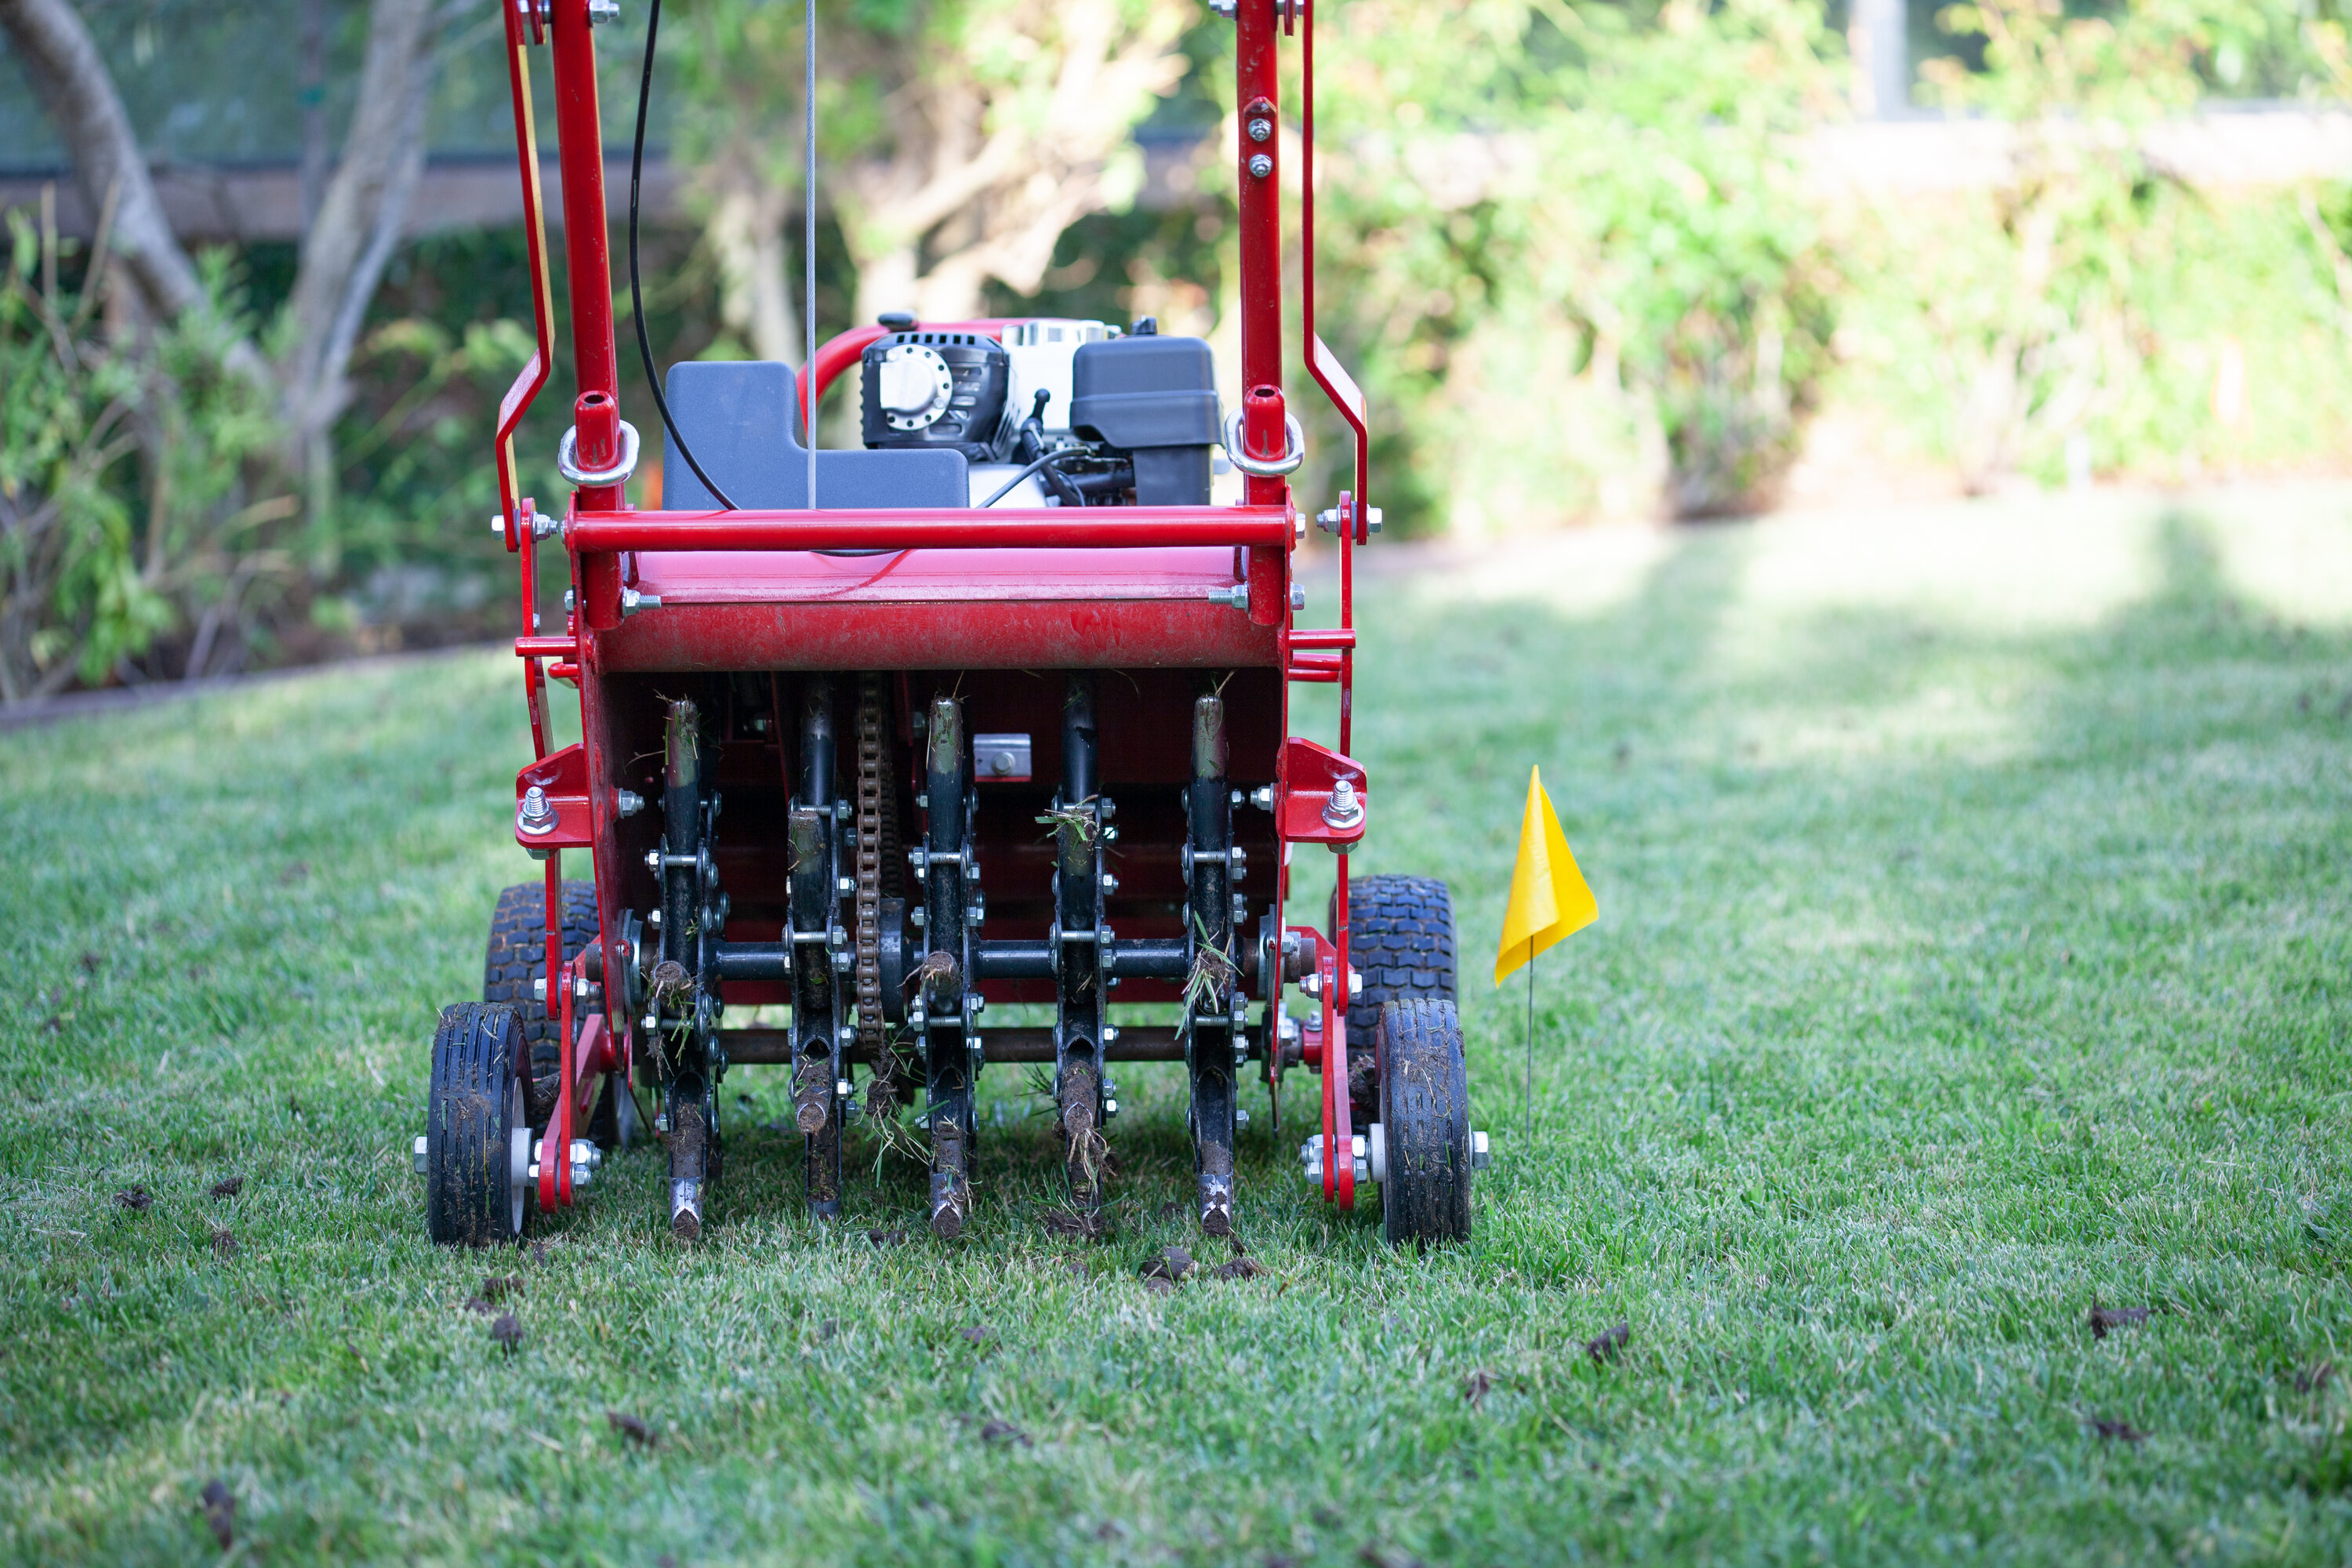 A photo of a red and black lawn aeration machine, sitting on a grass lawn, with a yellow flag next to it